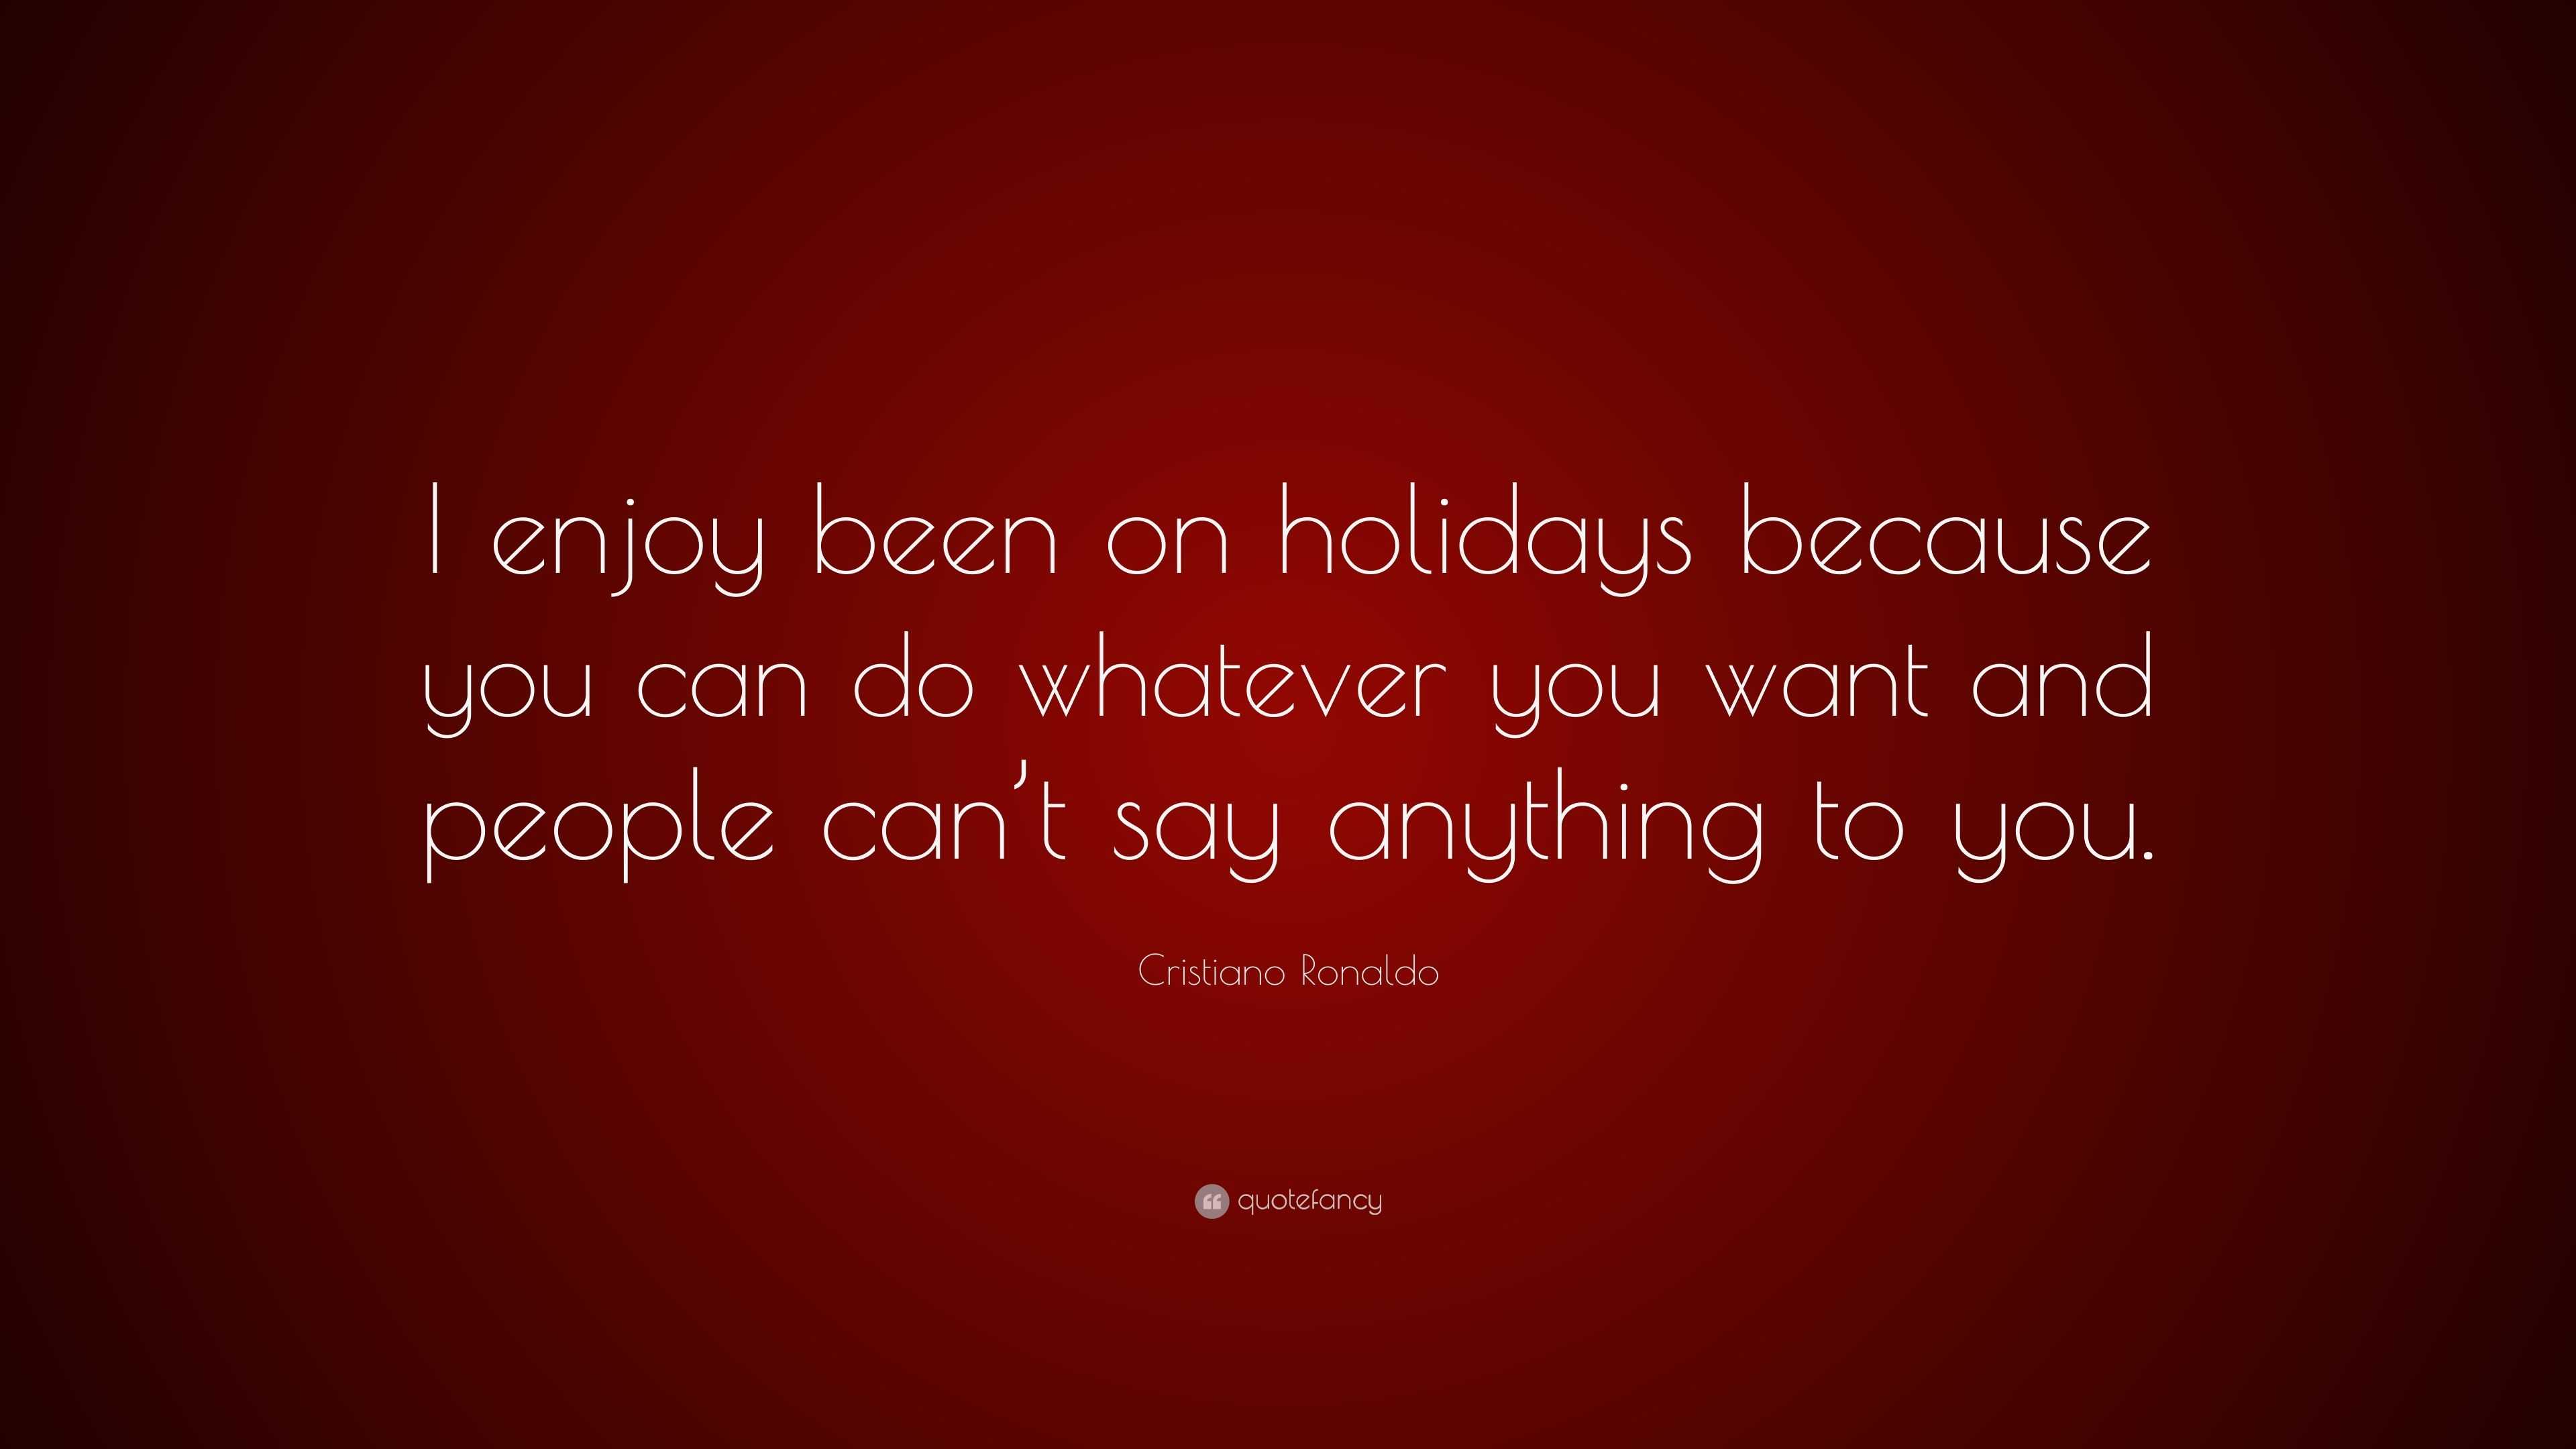 Cristiano Ronaldo Quote: “I enjoy been on holidays because you can do ...